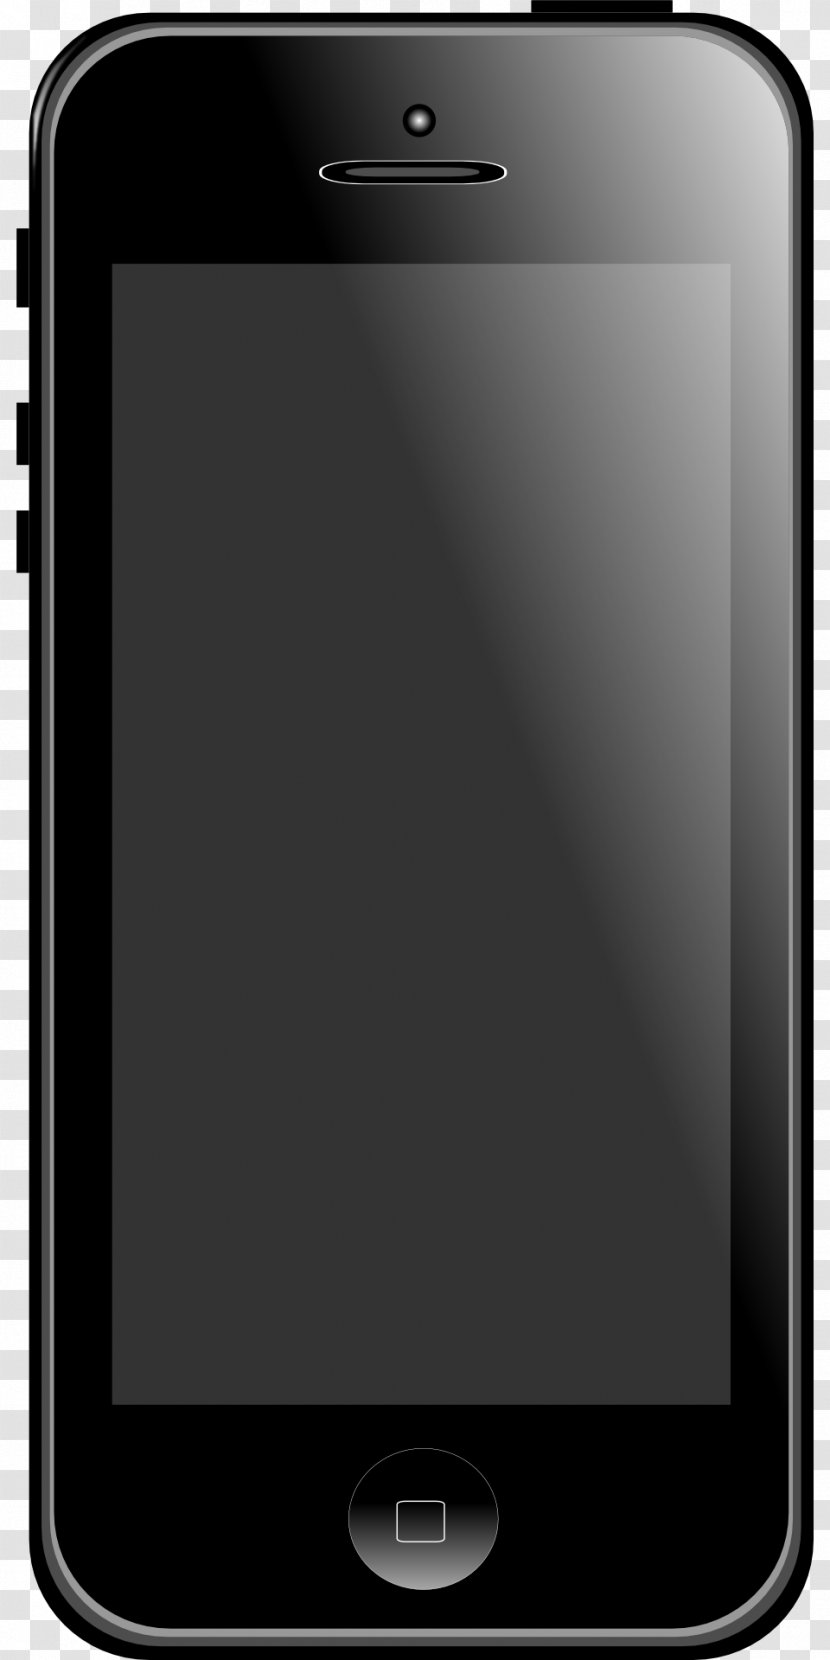 IPhone Smartphone Telephone Handheld Devices Cellular Network - Electronic Device - Cellphone Transparent PNG